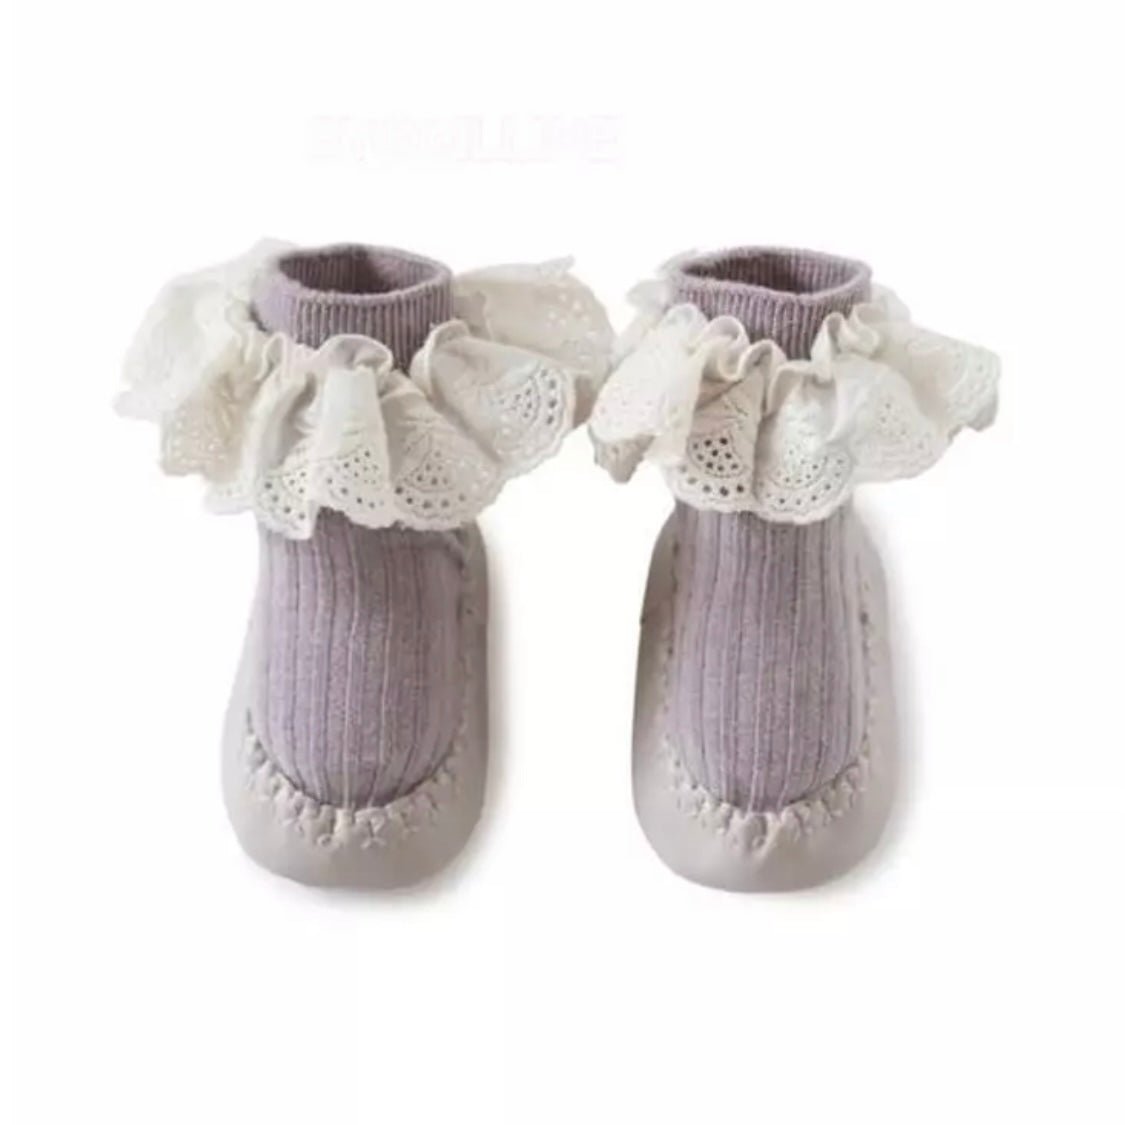 Lace Walk Soft Booties find Stylish Fashion for Little People- at Little Foxx Concept Store